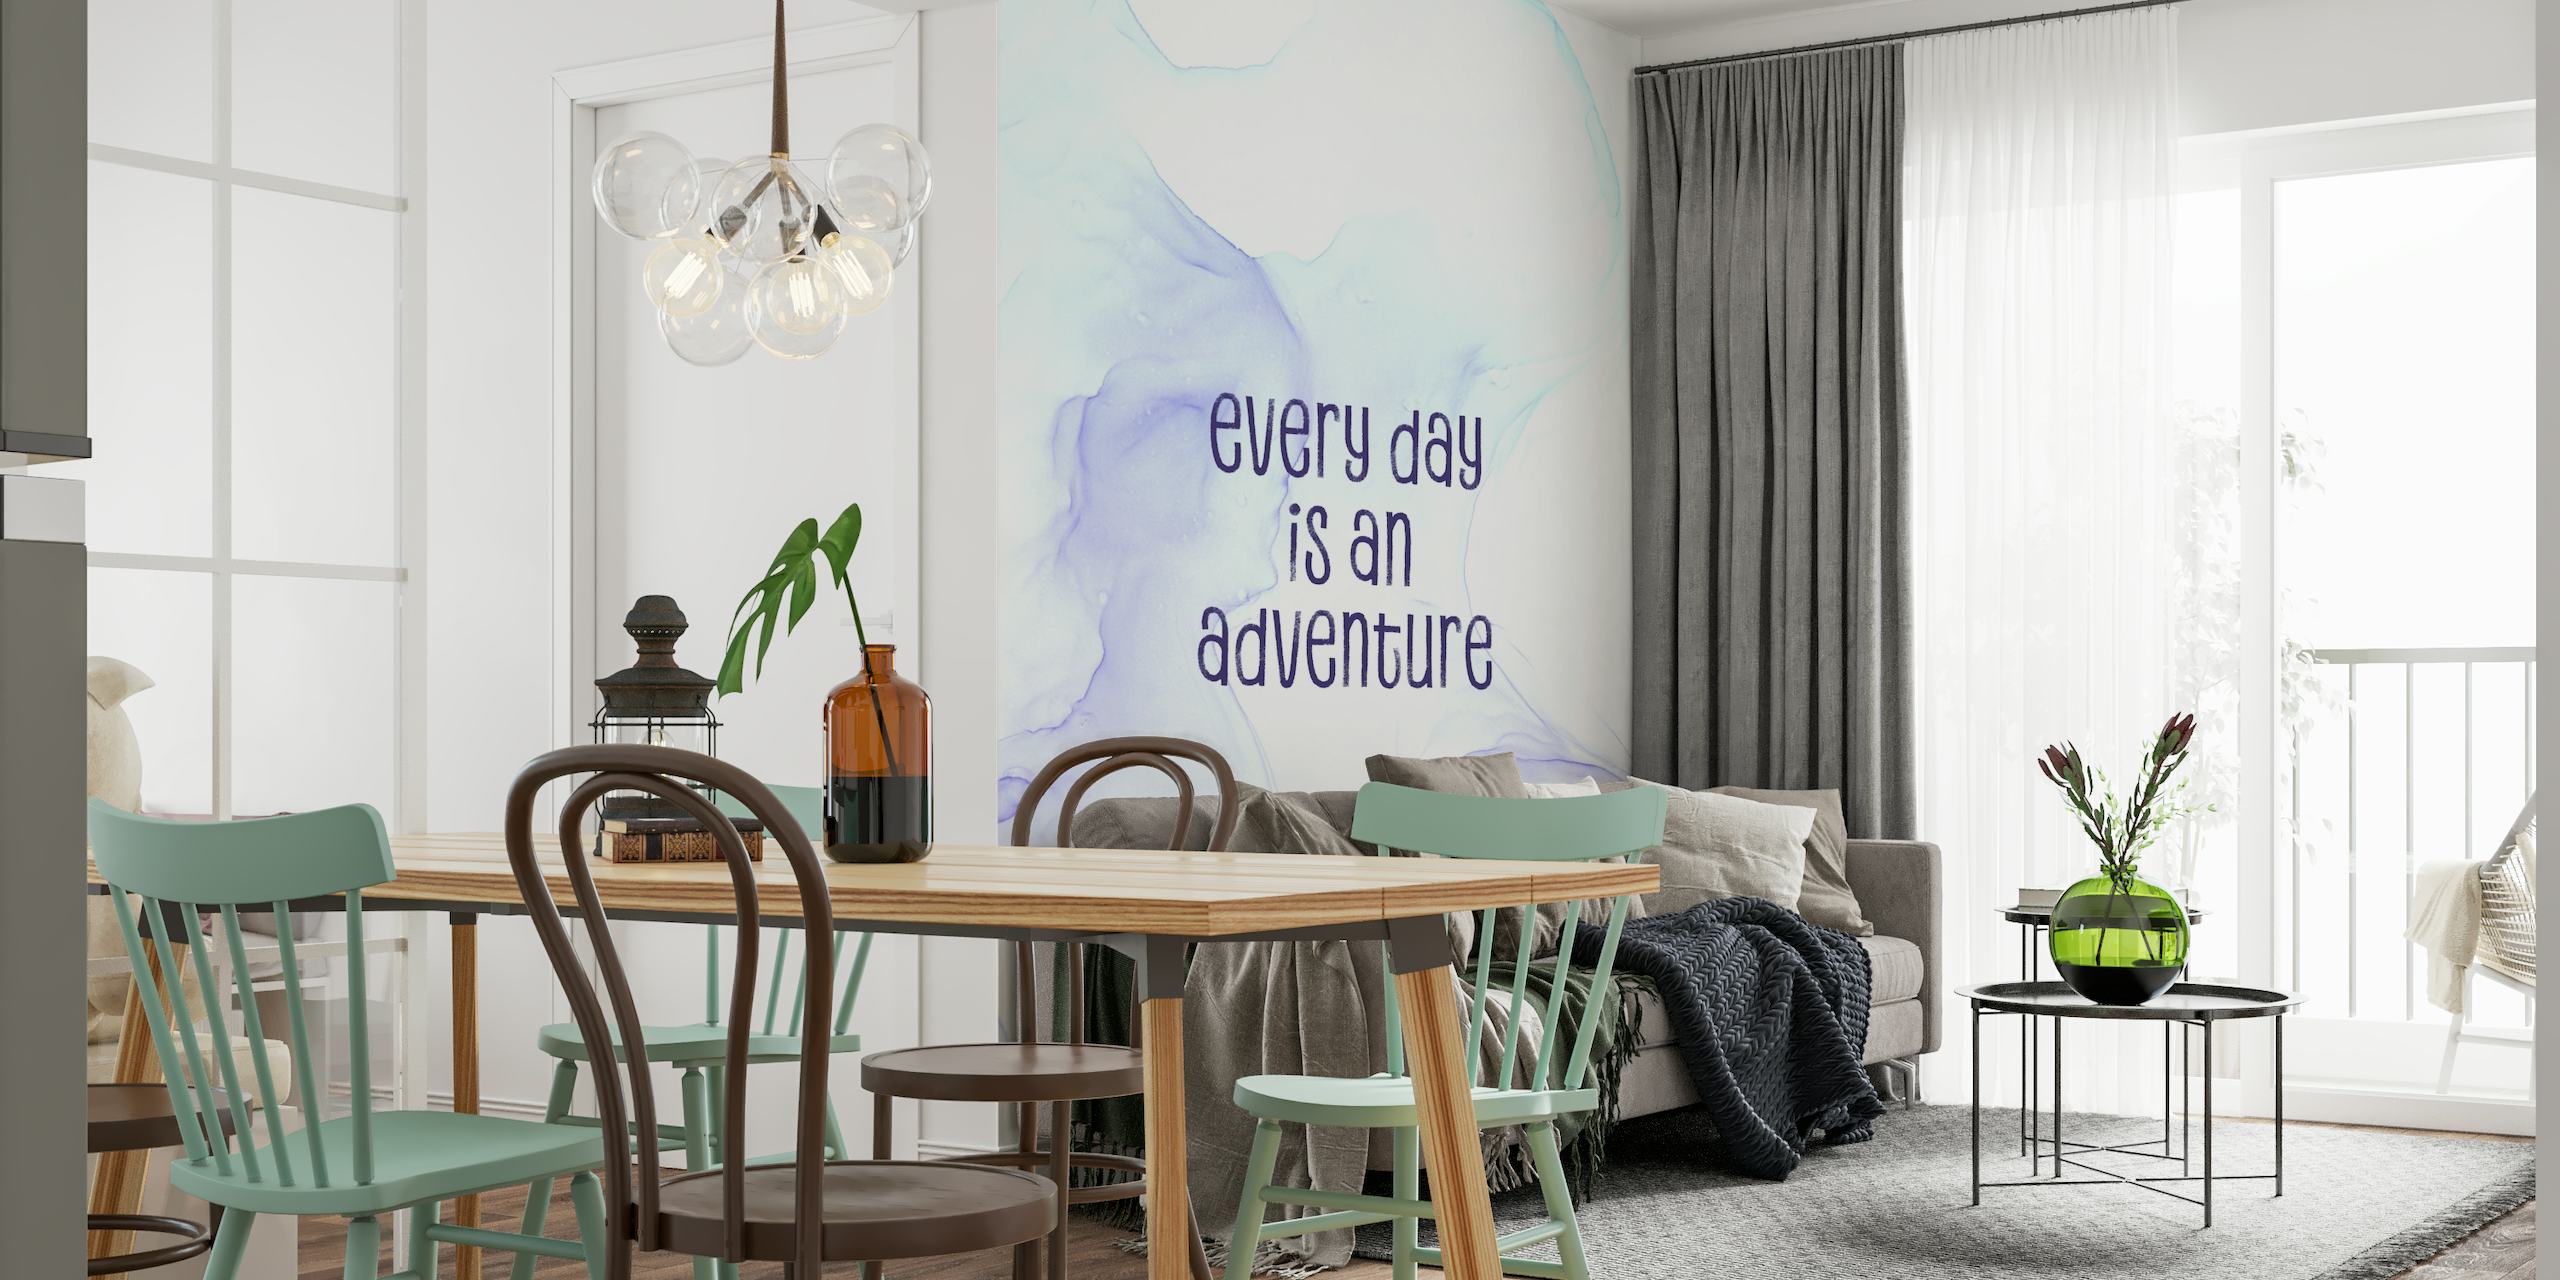 Every day is an adventure papel pintado